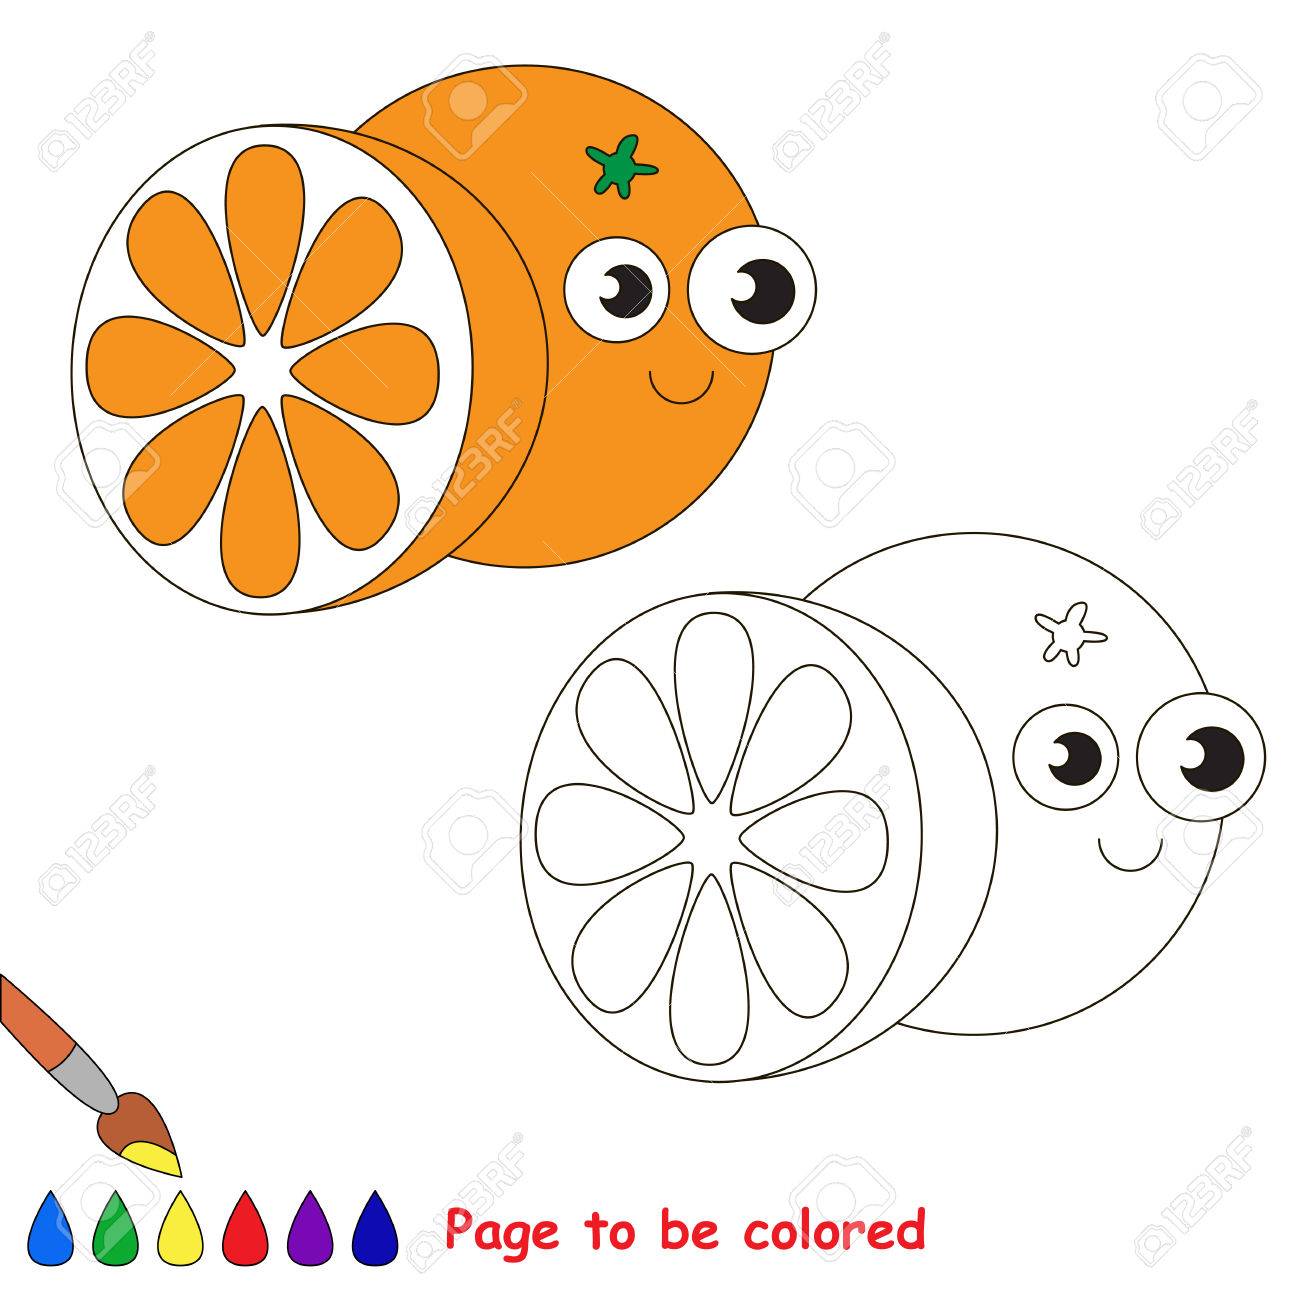 Funny orange to be colored coloring book to educate kids learn colors visual educational game easy kid gaming and primary education simple level of difficulty coloring pages royalty free svg cliparts vectors